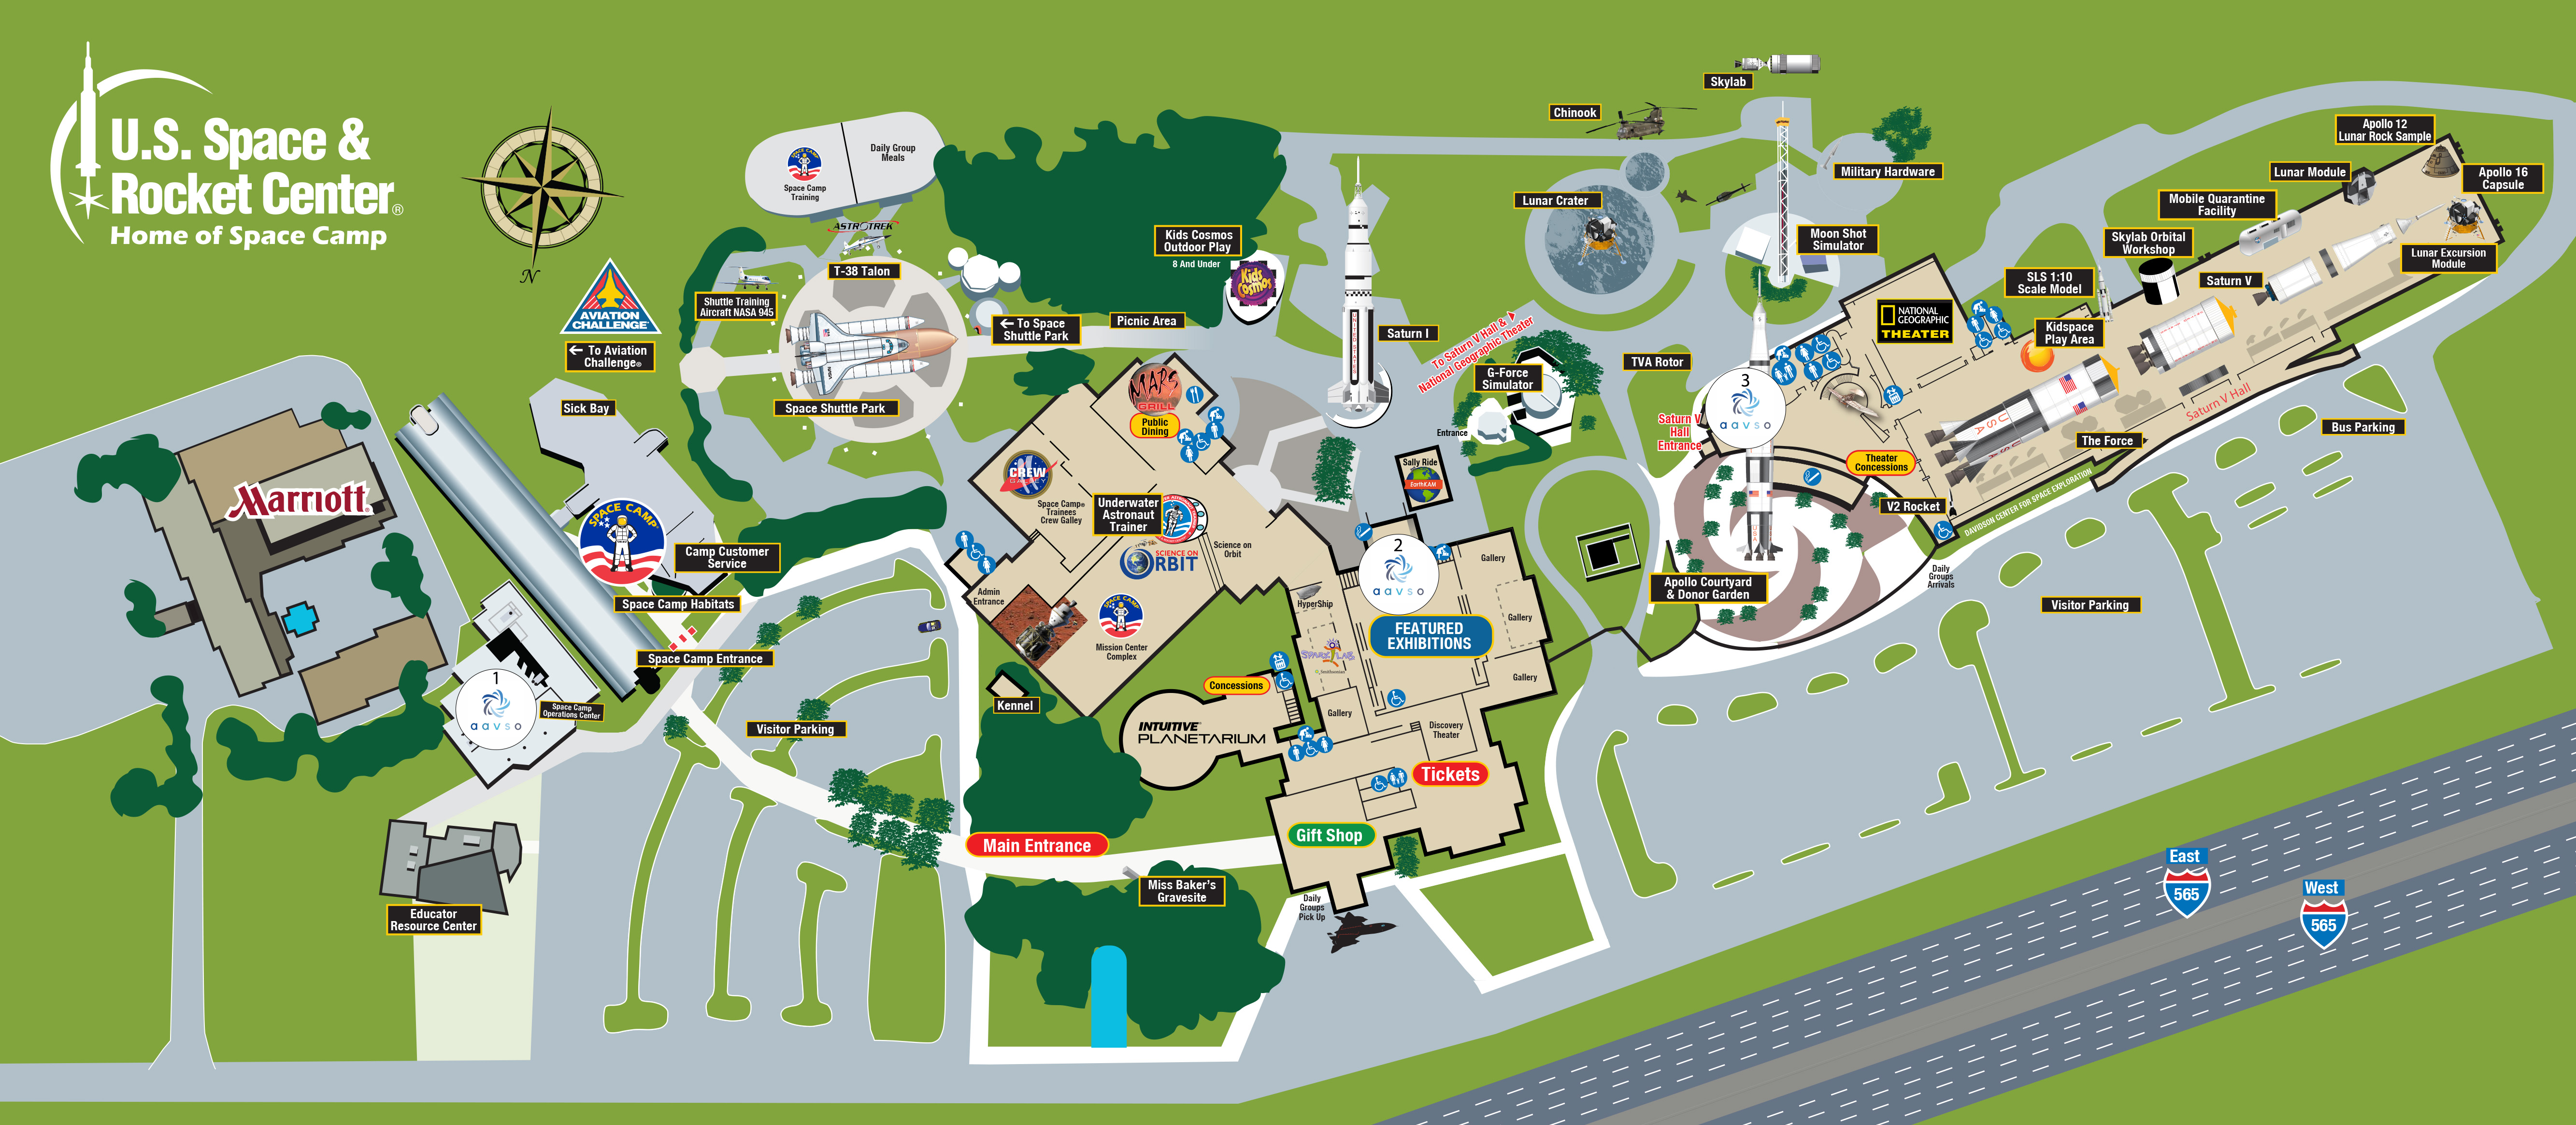 "Map of USSRC Campus"